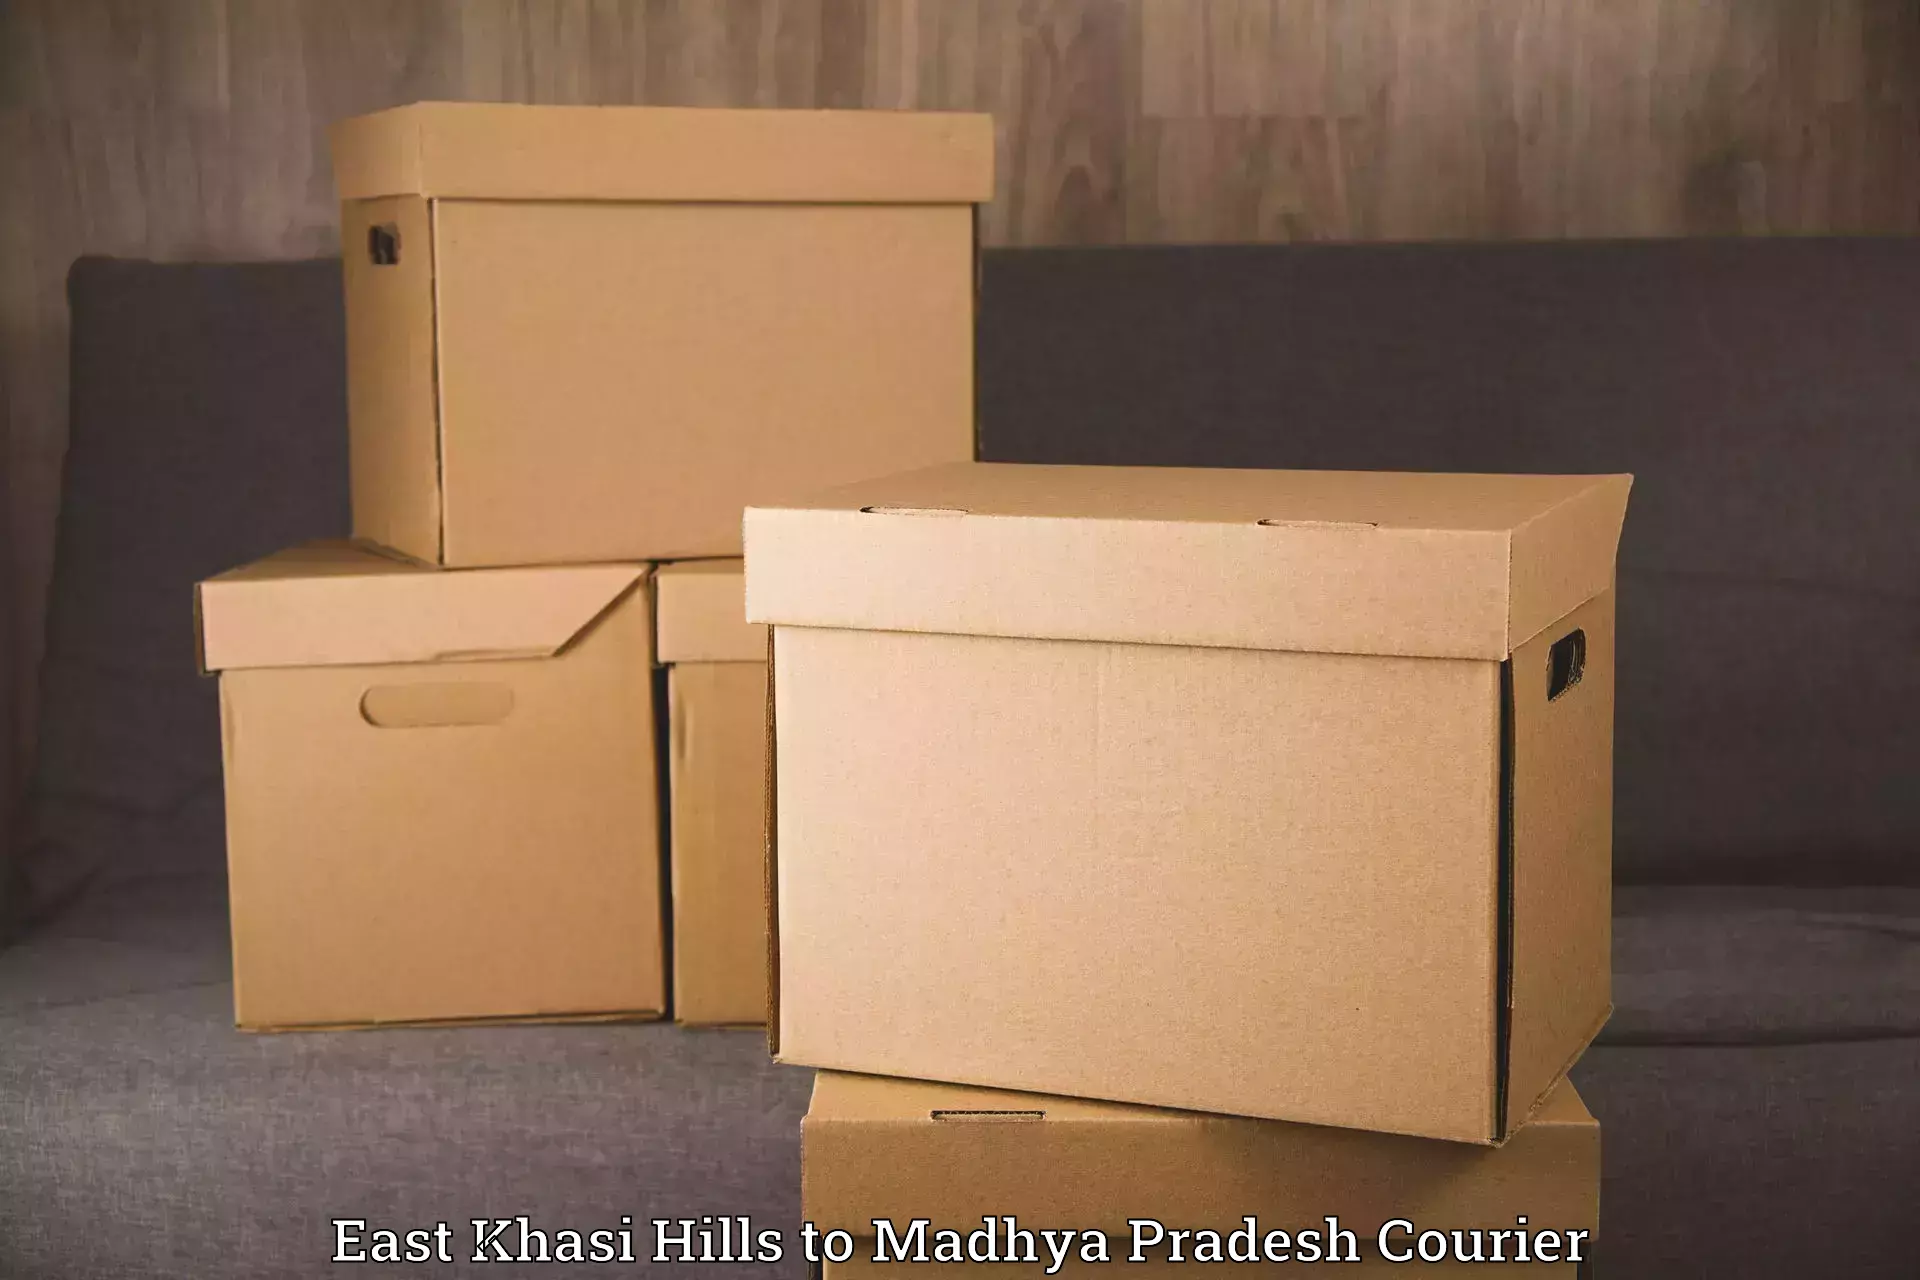 Budget-friendly moving services in East Khasi Hills to Raipur Karchuliyan